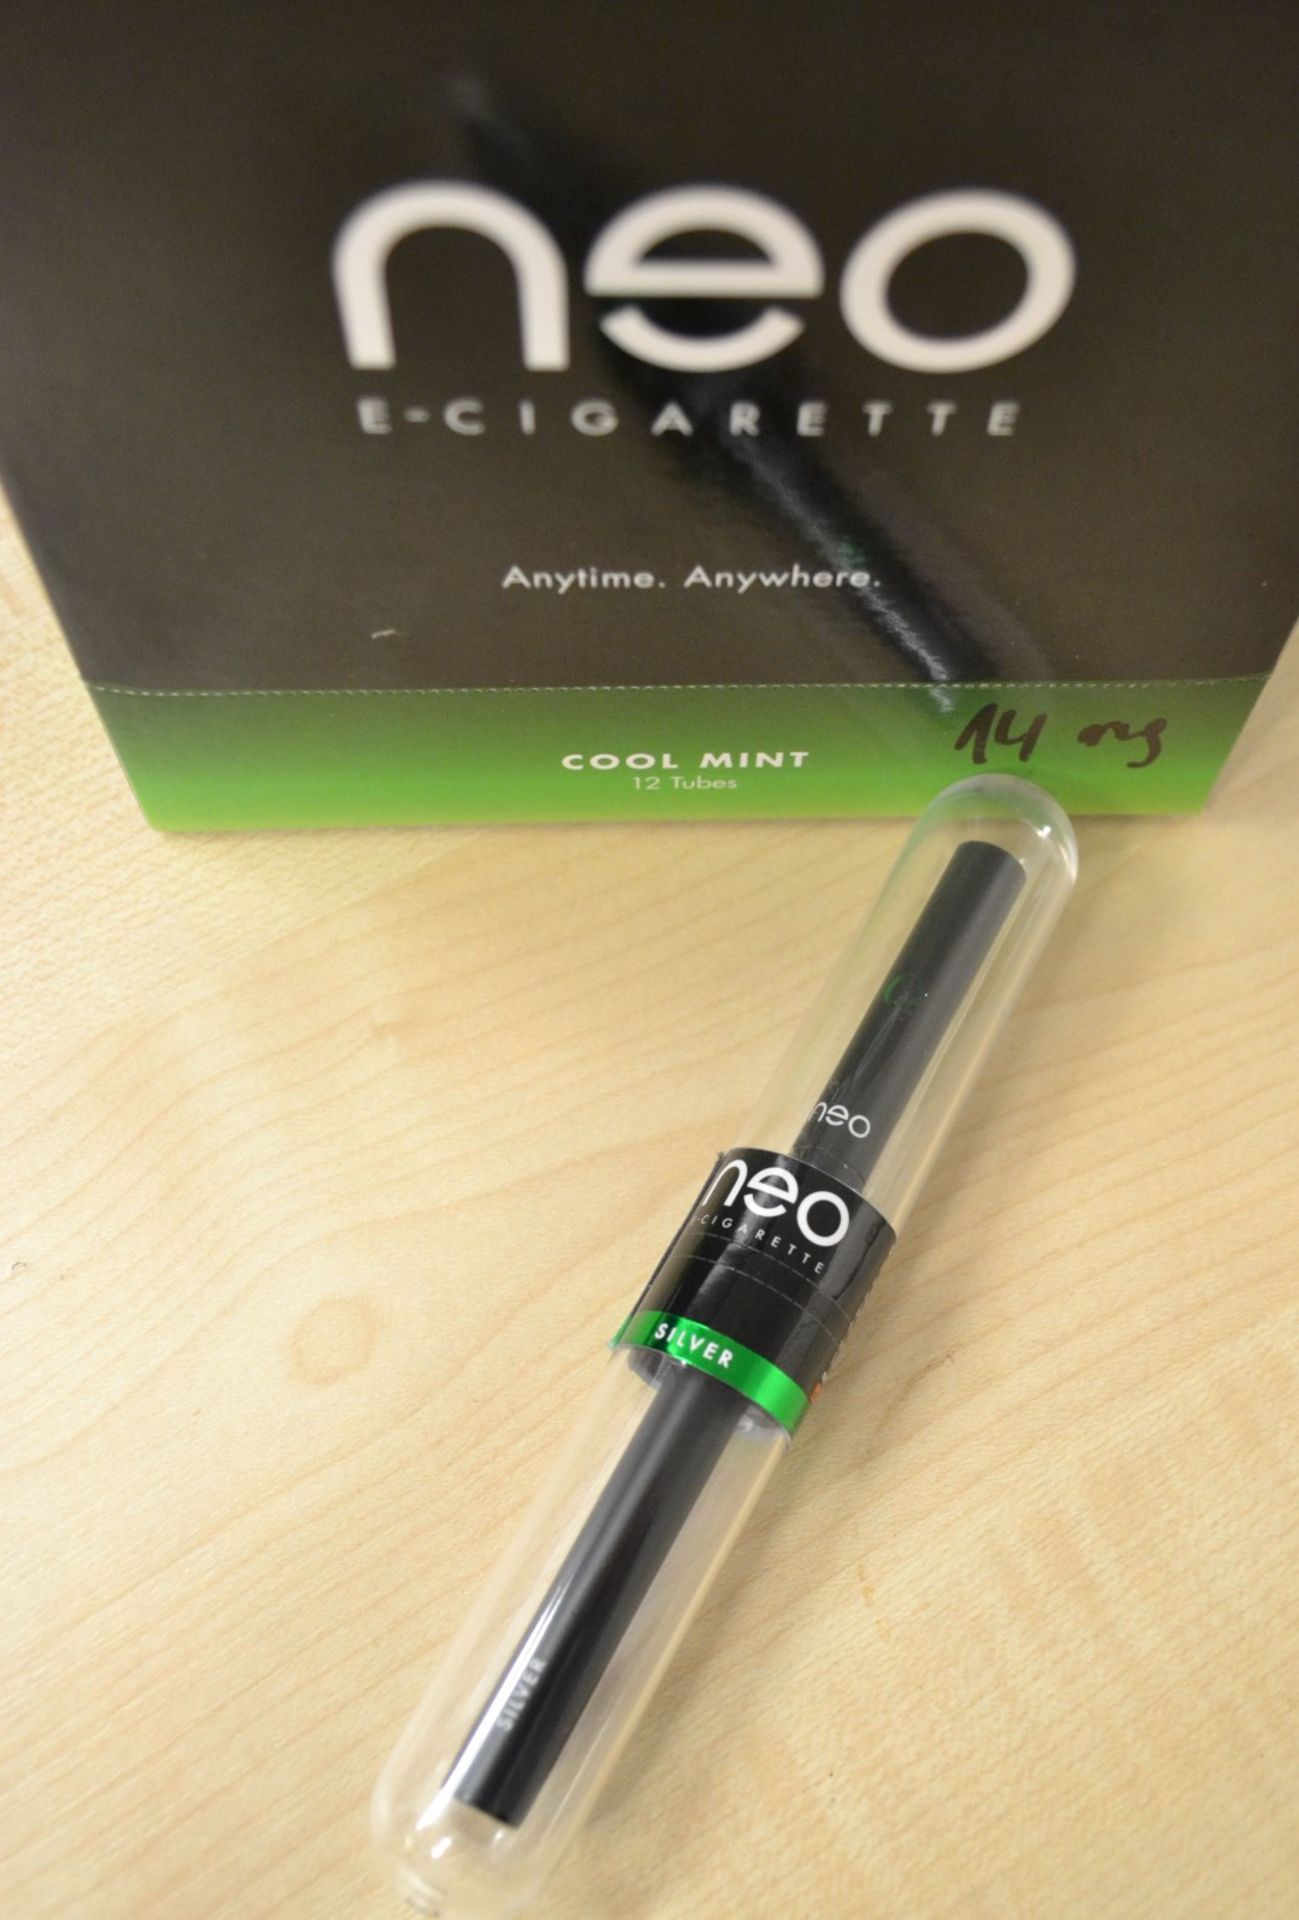 60 x Neo E-Cigarettes Cool Mint Disposable Electronic Cigarettes - New & Sealed Stock - CL185 - Ref: - Image 7 of 8